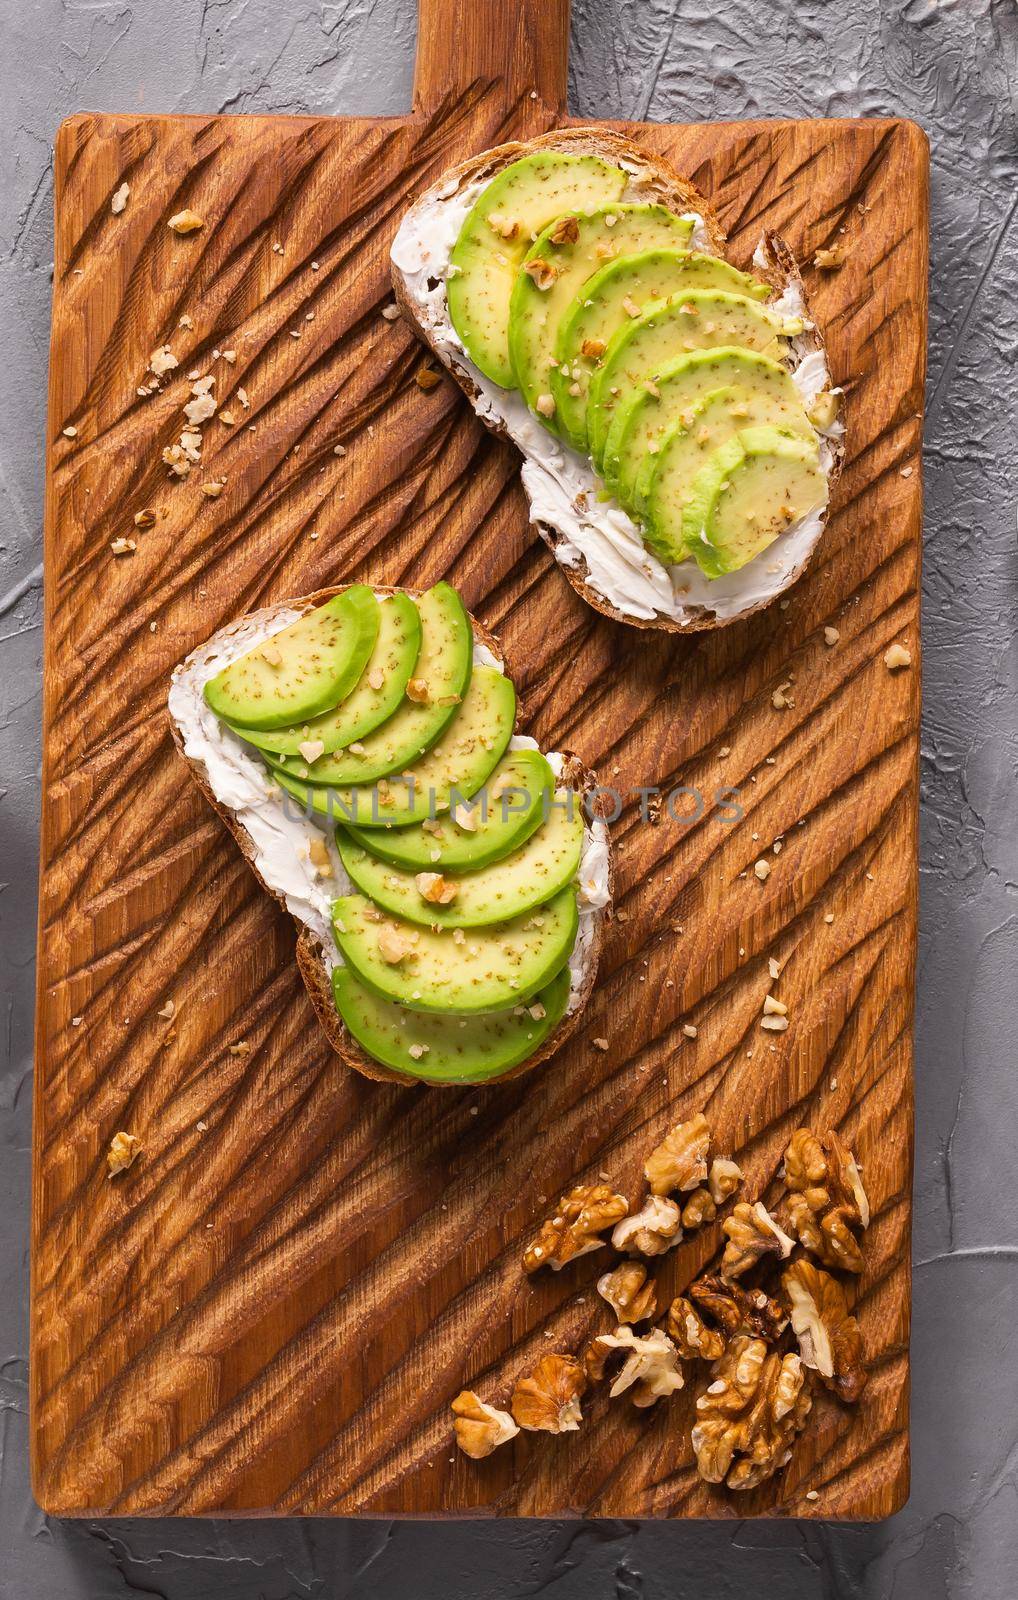 Sliced avocado on toast bread with nuts. Breakfast and healthy food concept. by Satura86